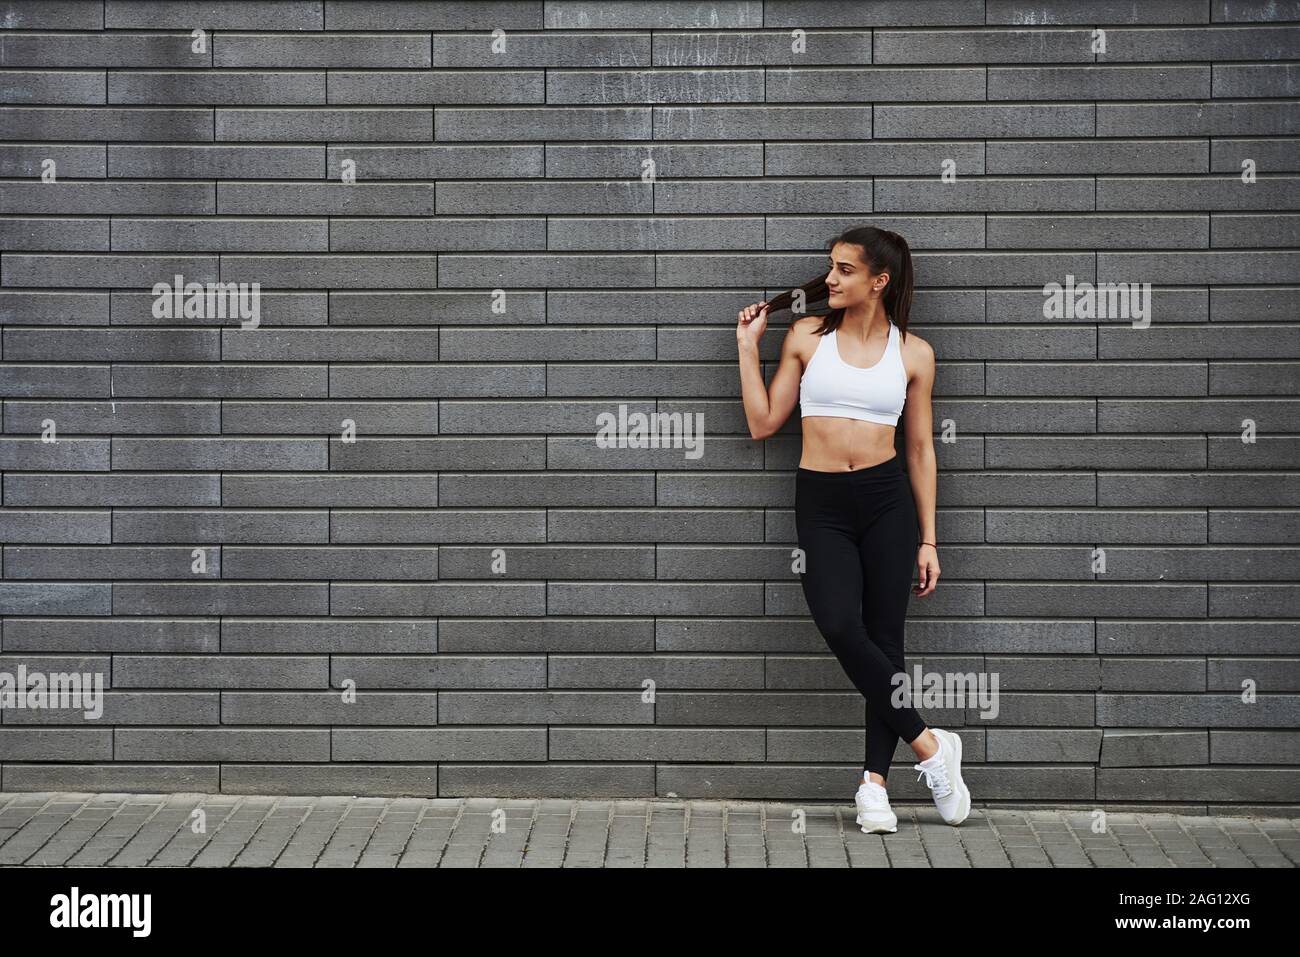 Young sportive brunette with slim body shape against brick wall in the city at daytime Stock Photo